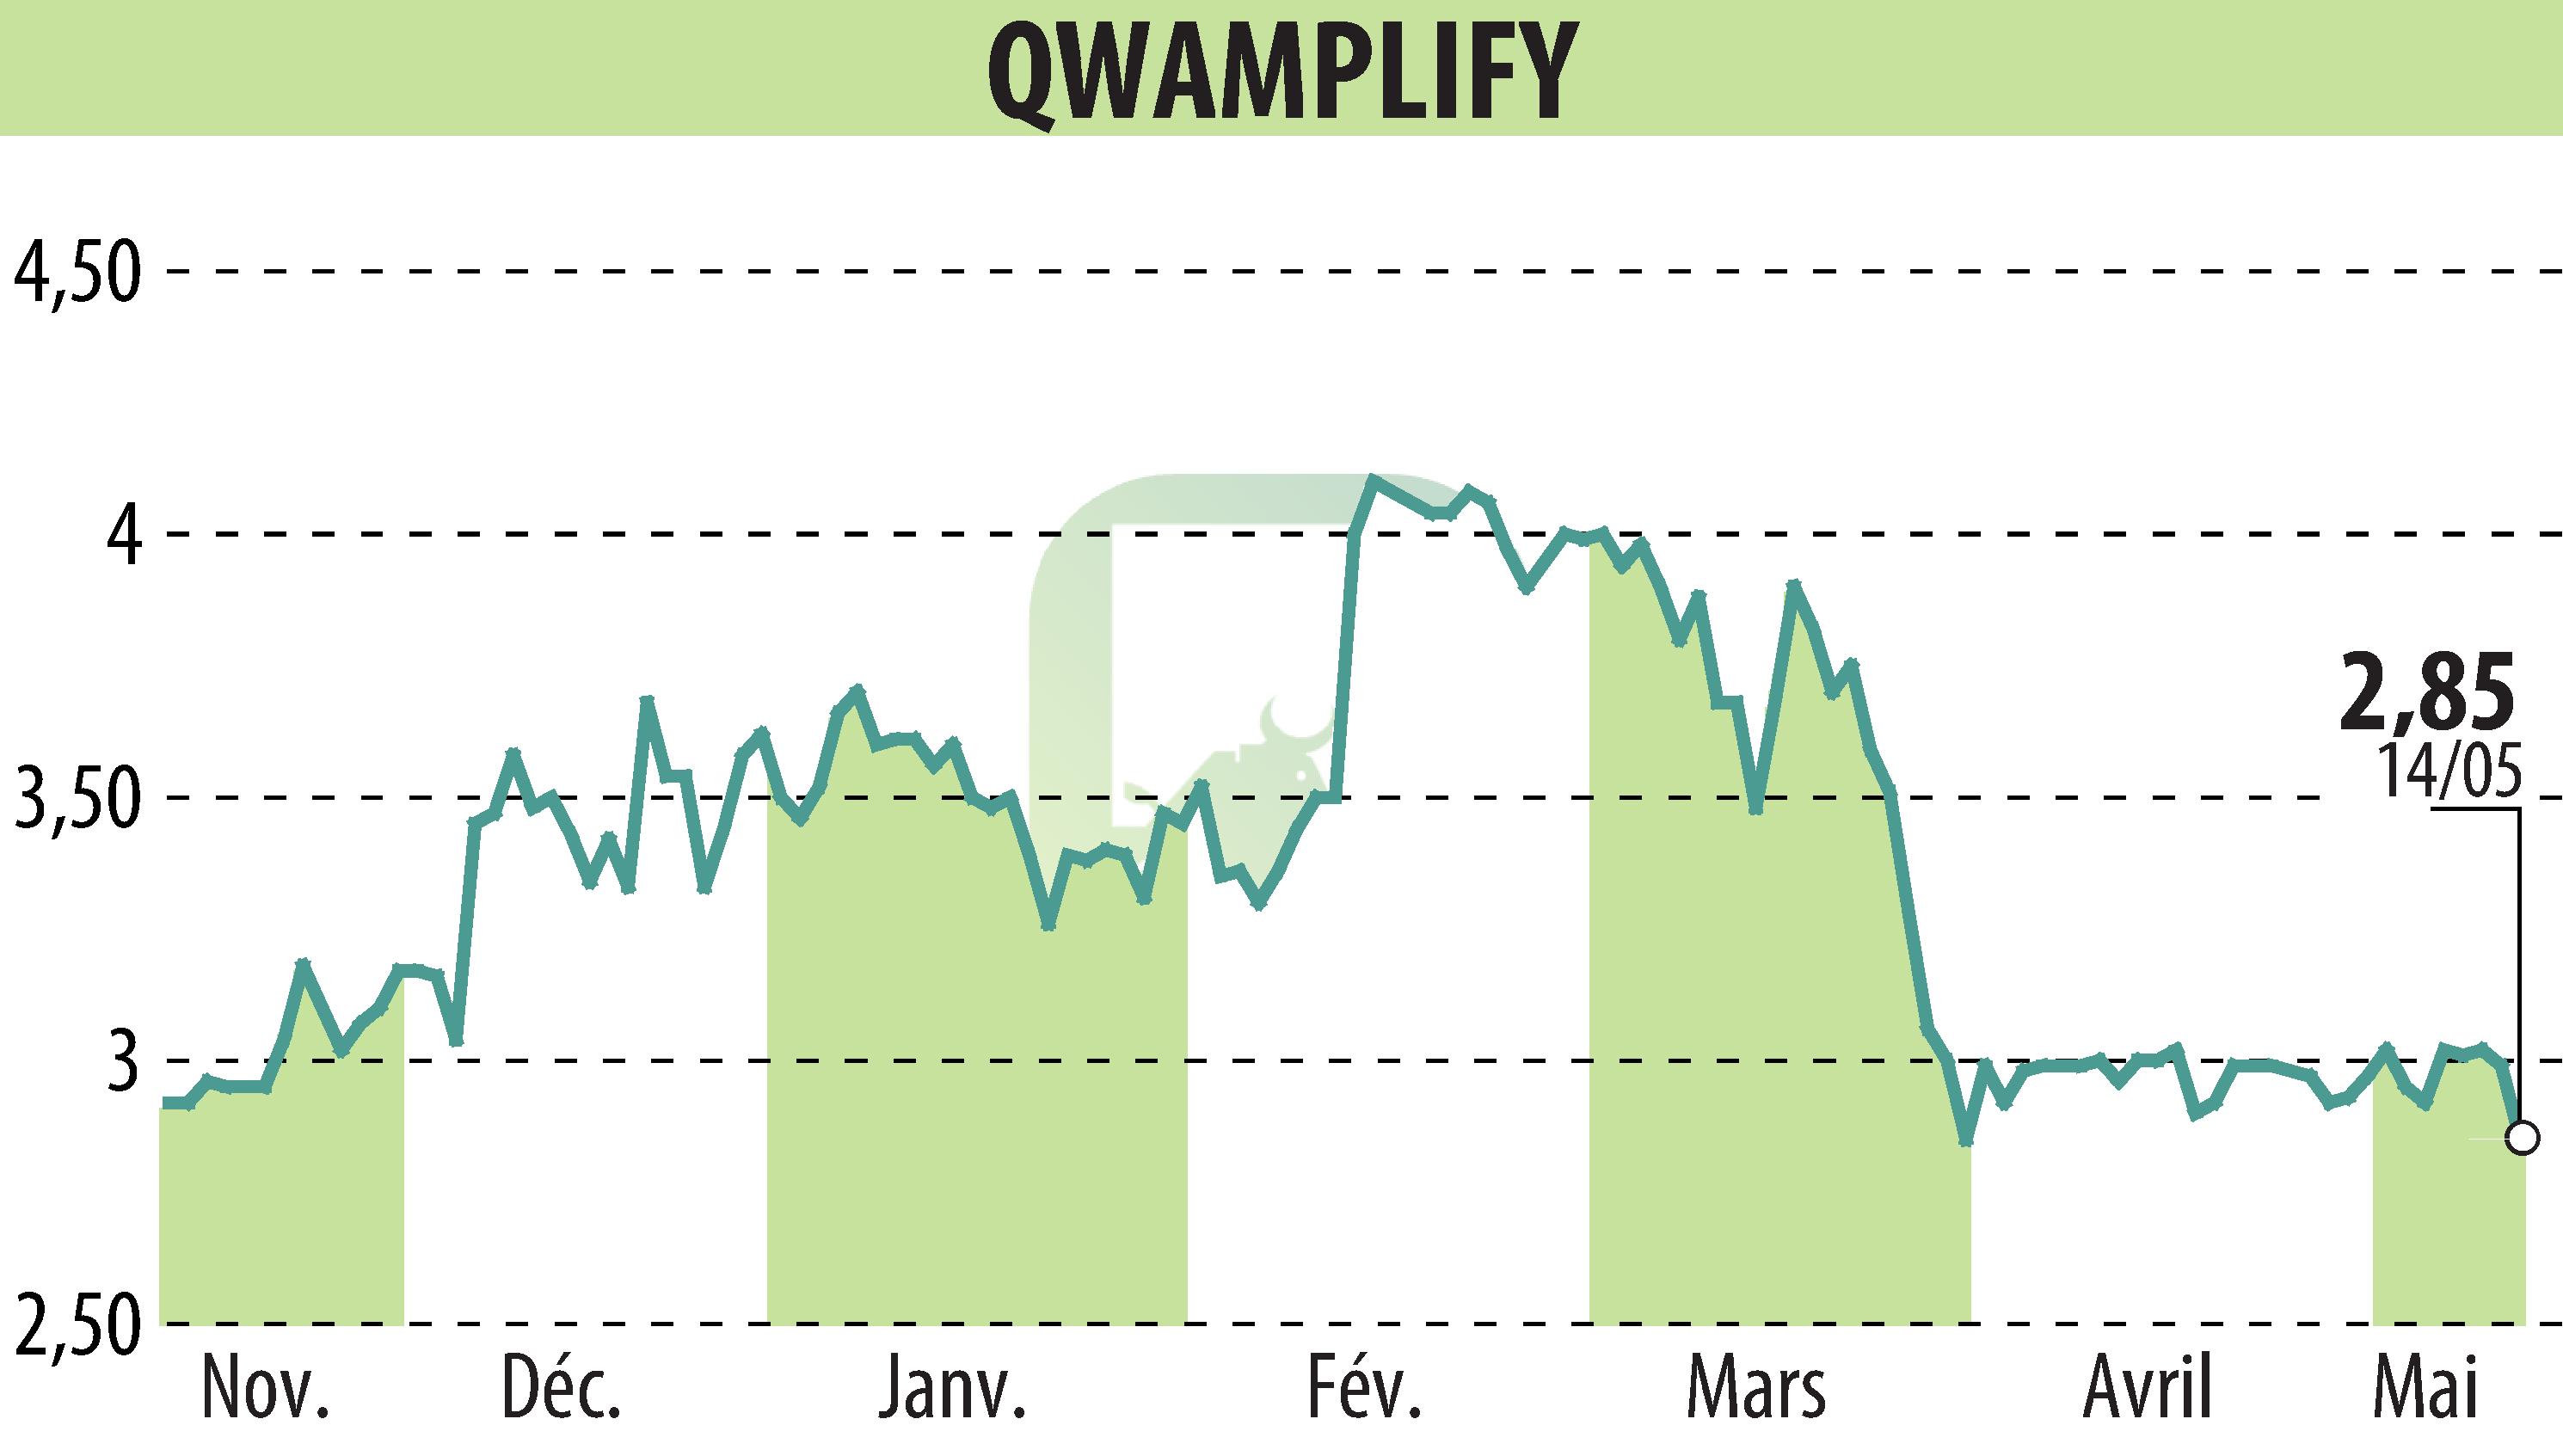 Stock price chart of QWAMPLIFY (EPA:ALQWA) showing fluctuations.